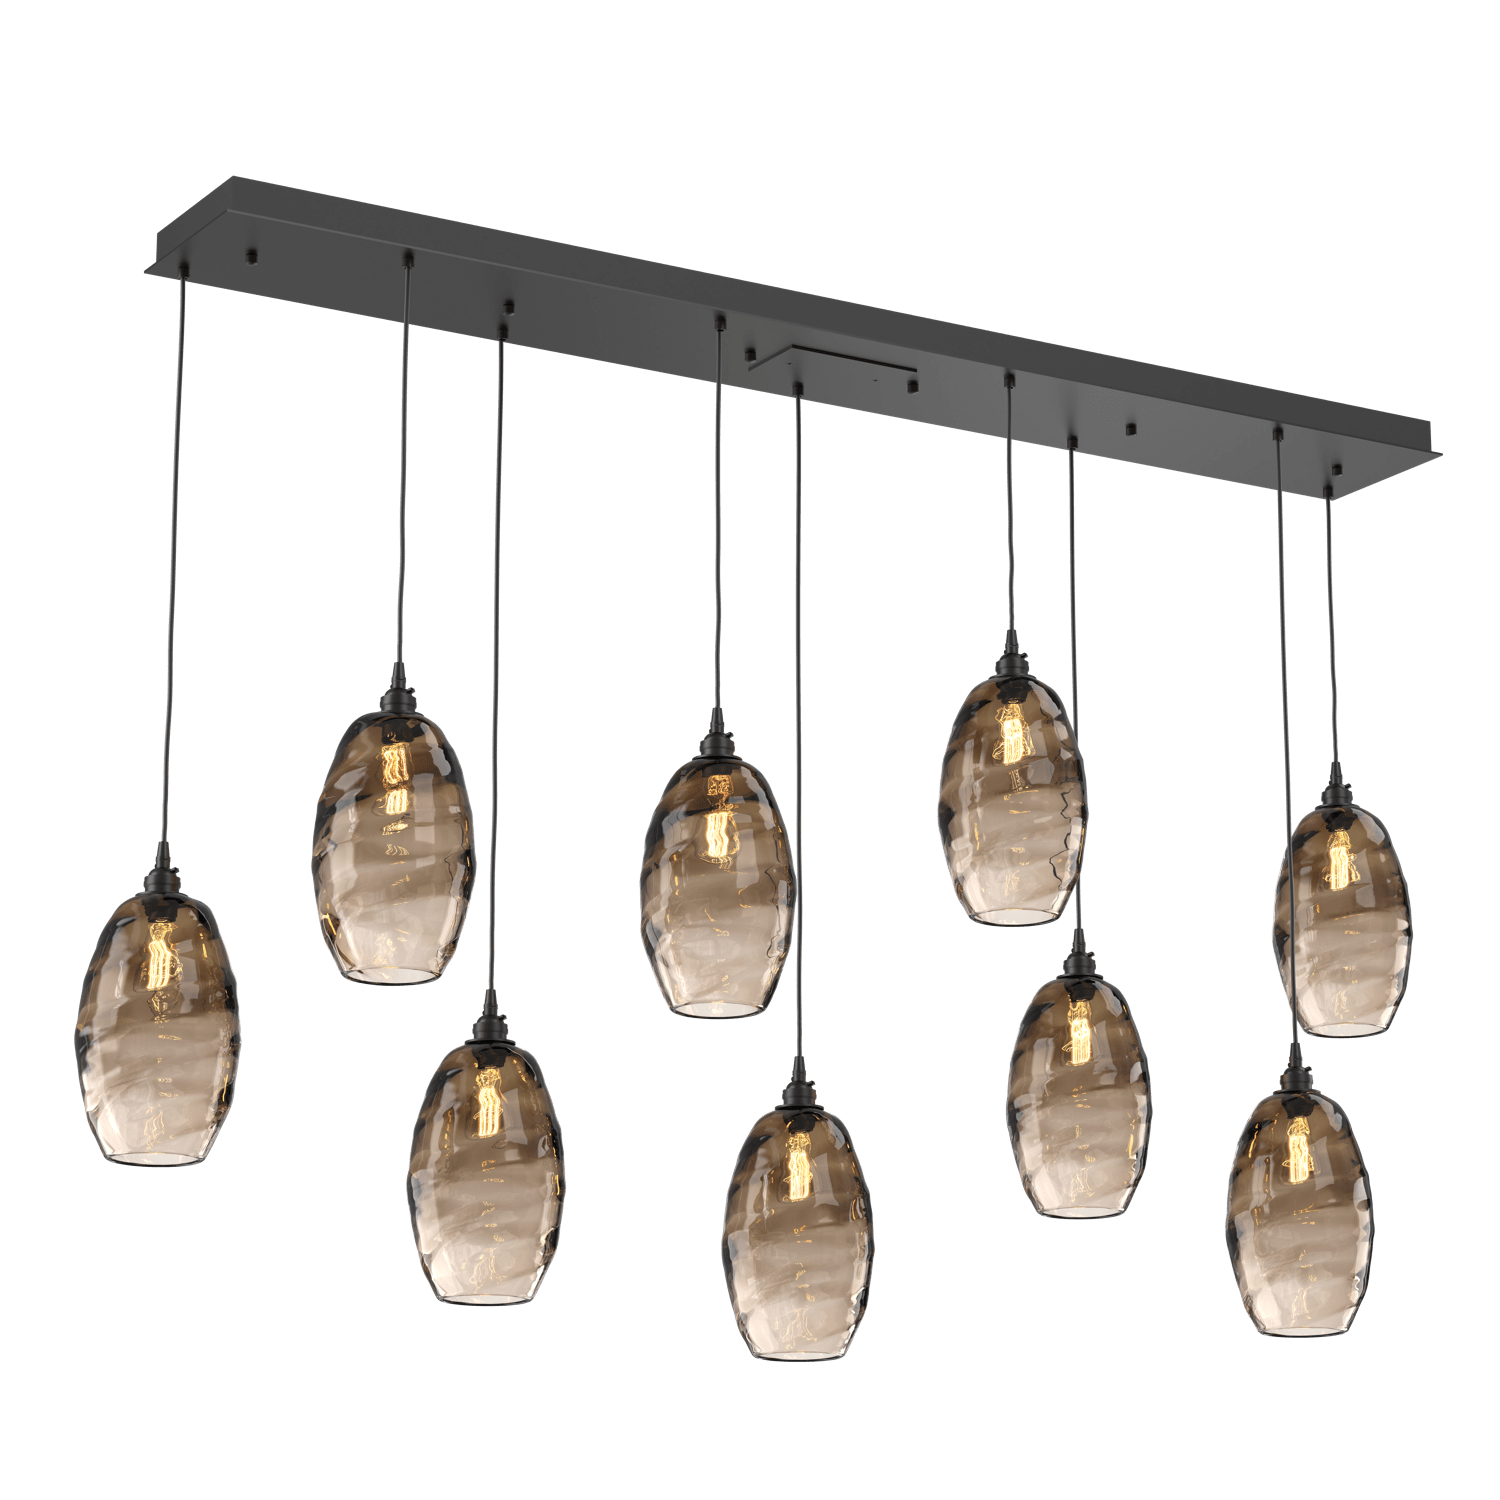 PLB0035-09-MB-OB-Hammerton-Studio-Optic-Blown-Glass-Elisse-9-light-linear-pendant-chandelier-with-matte-black-finish-and-optic-bronze-blown-glass-shades-and-incandescent-lamping